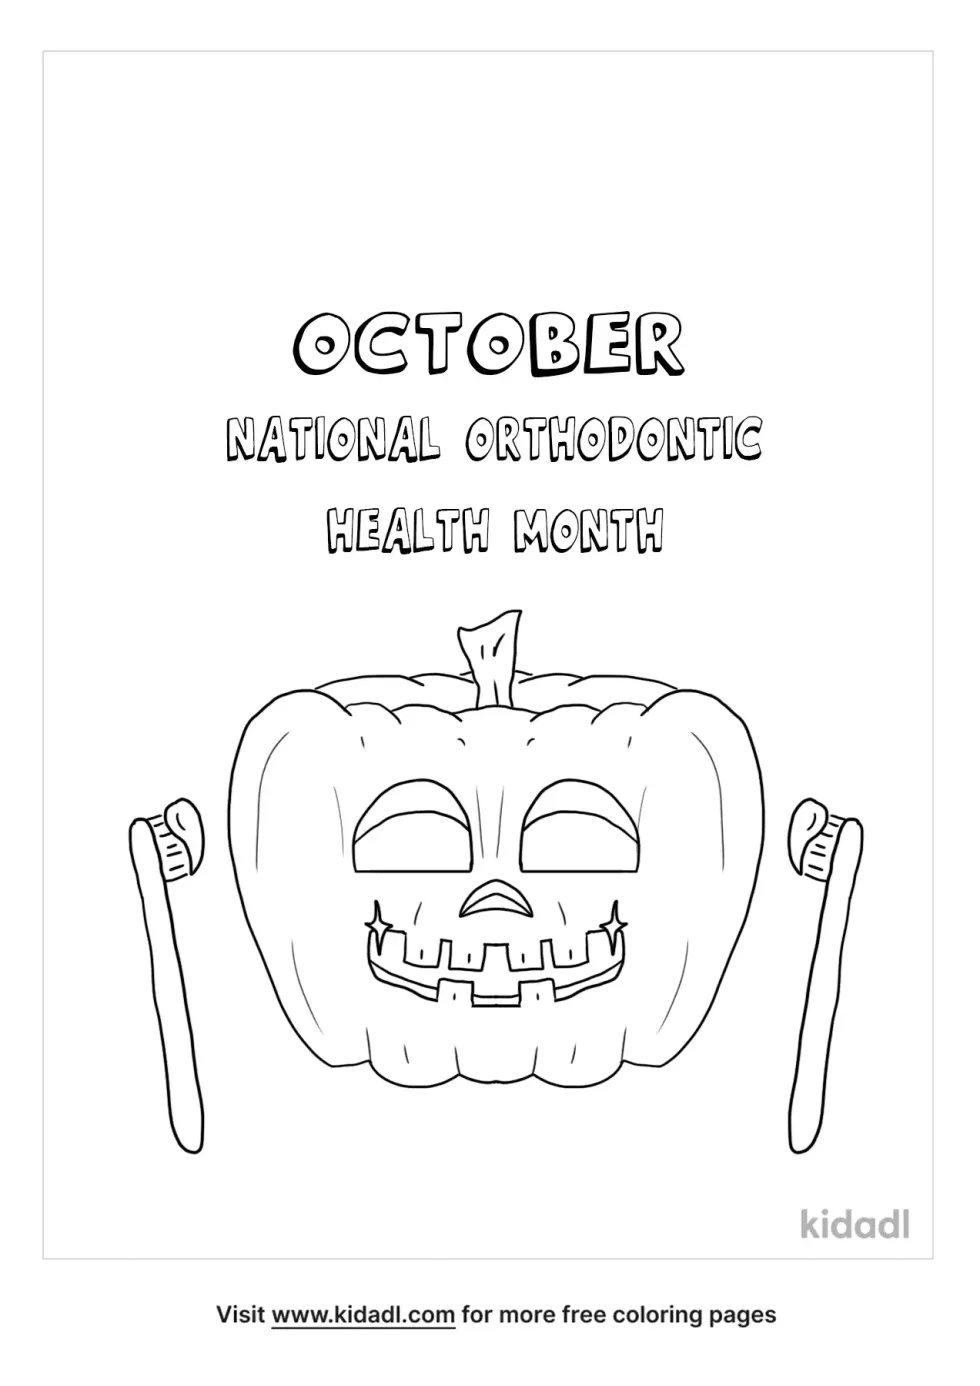 National Ortho Month